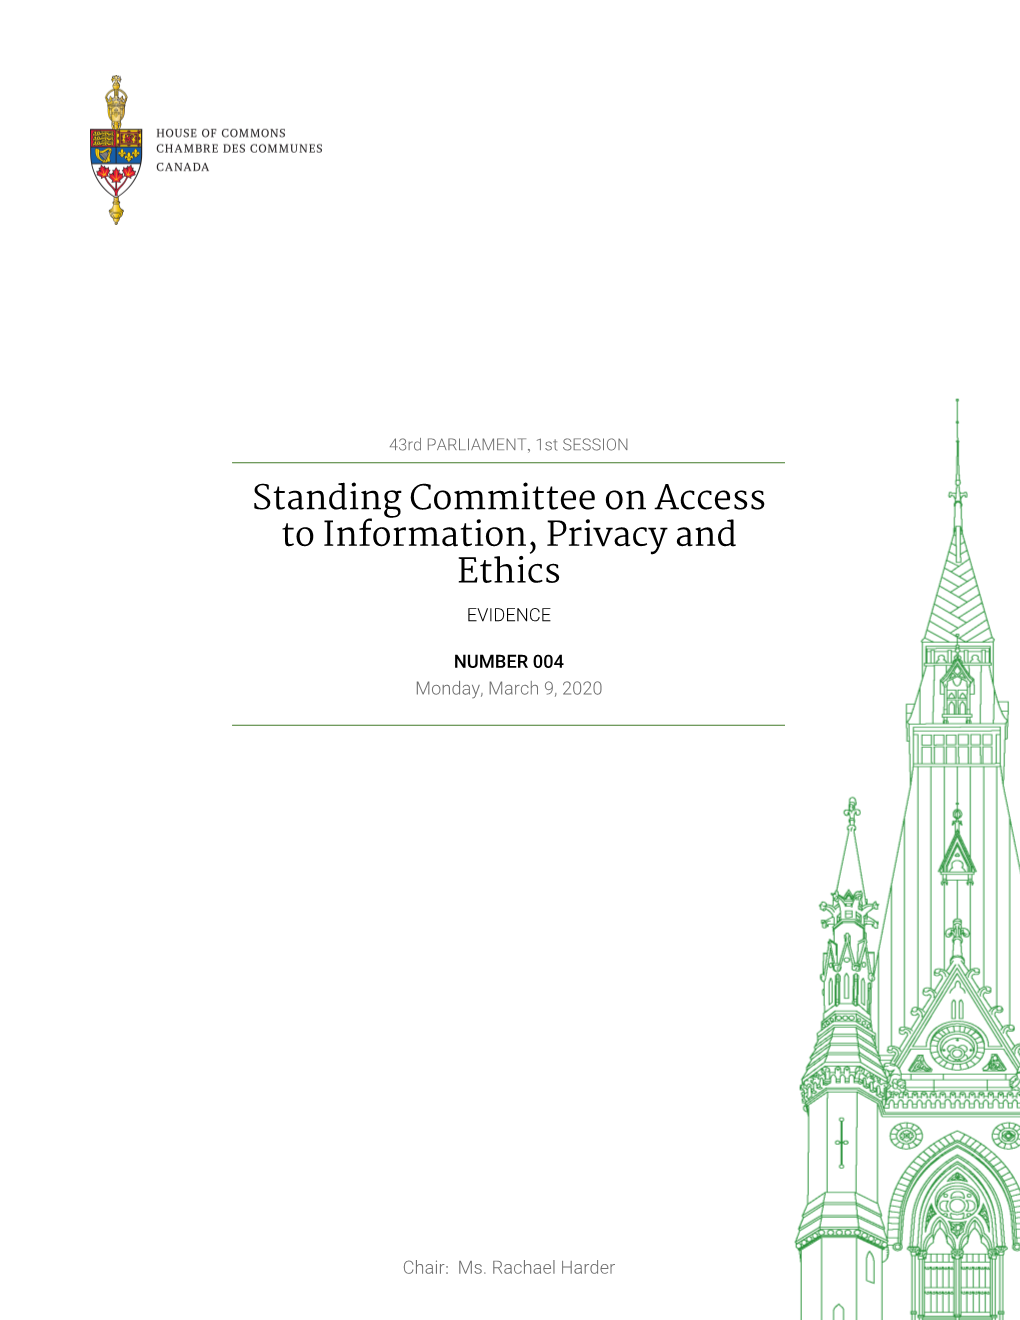 Evidence of the Standing Committee on Access to Information, Privacy and Ethics